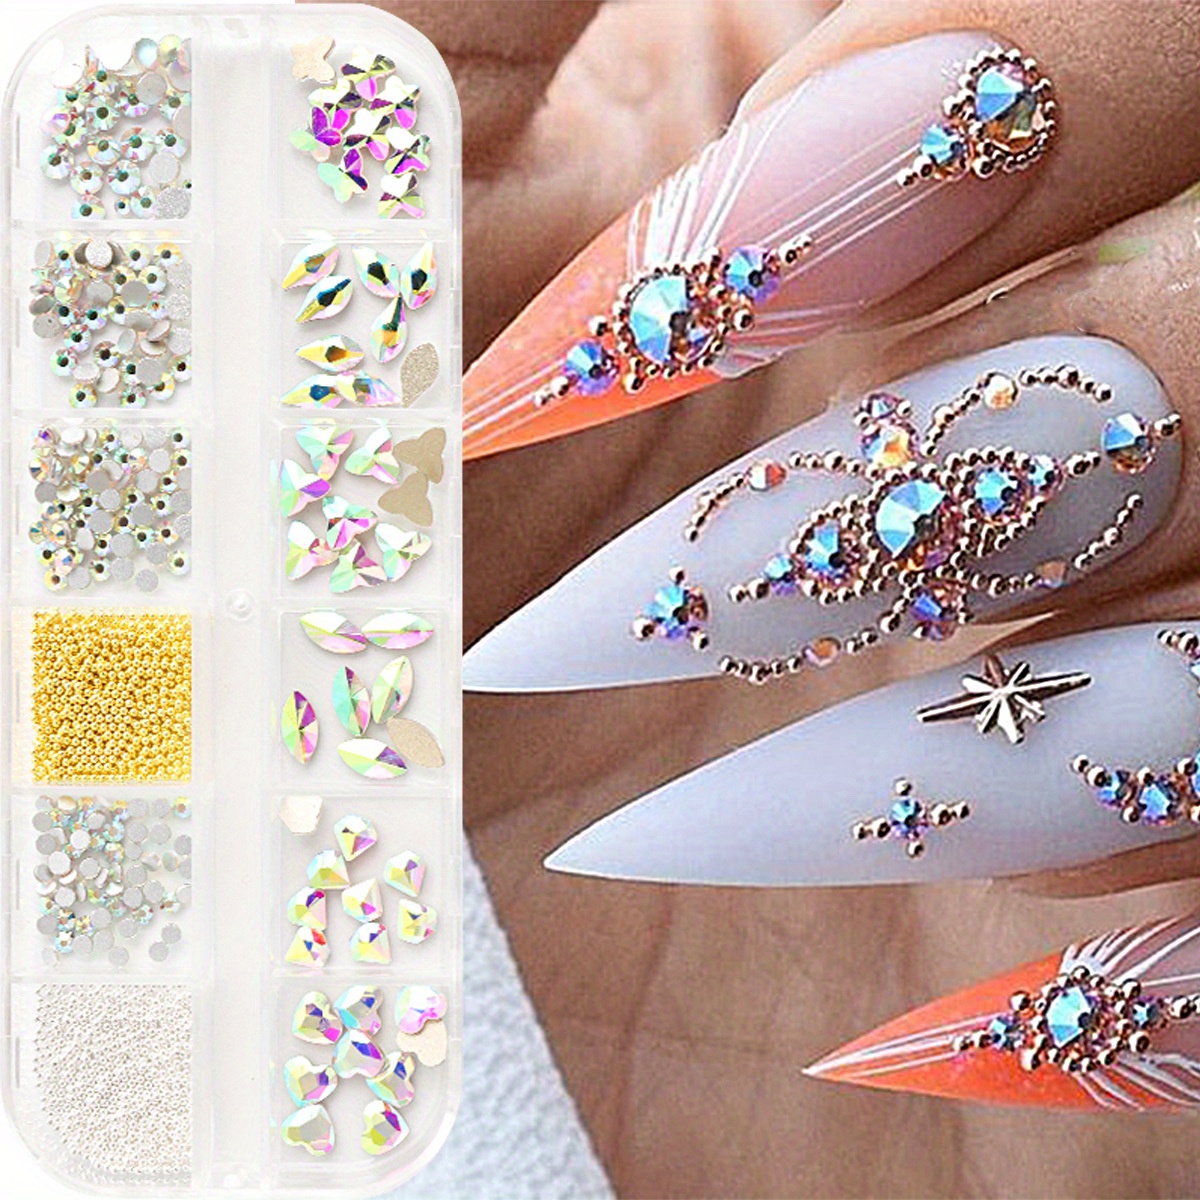 5400 Pieces Crystal Nail Rhinestones Set, Spearlcable Glass Flat Back Round  AB Nail Gems for Crafts Nail Art Clothes Shoes Bags DIY